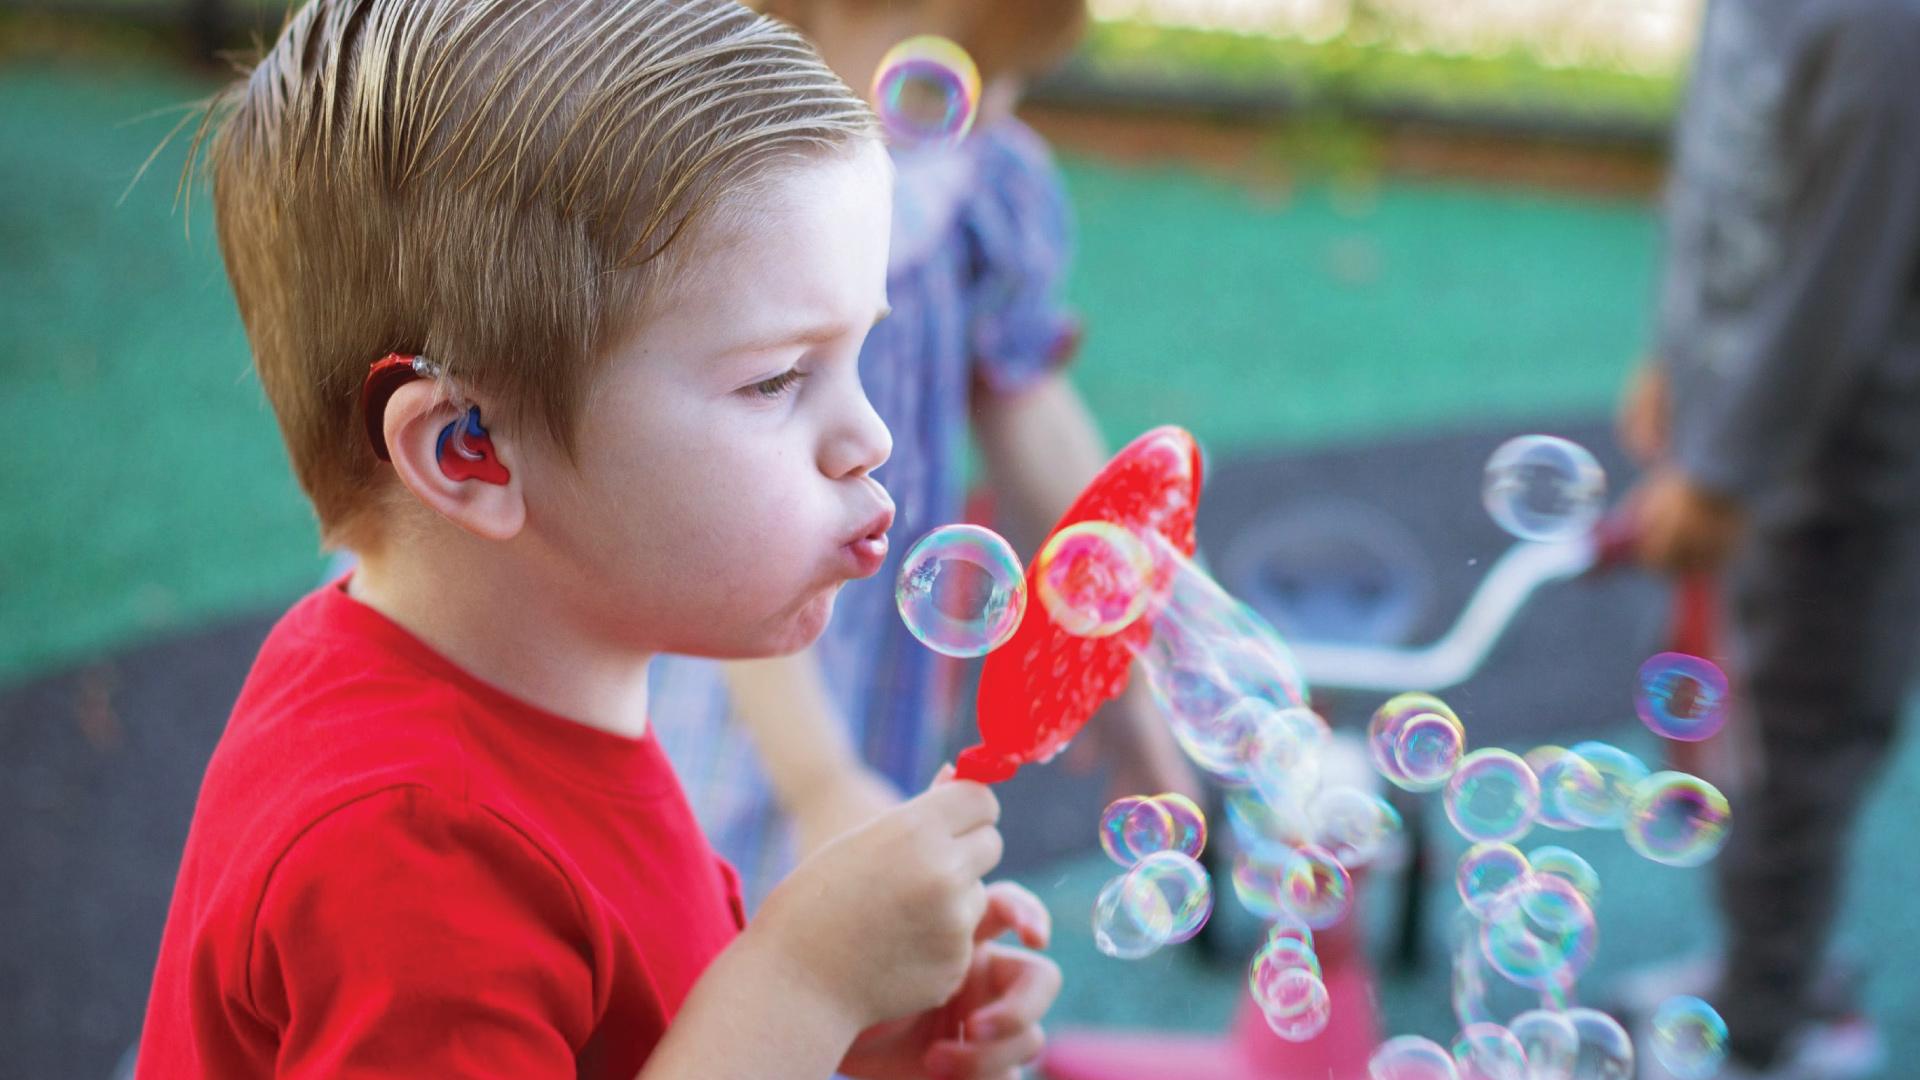 young boy in red shirt happily blowing bubbles and wearing matching red hearing aid devices